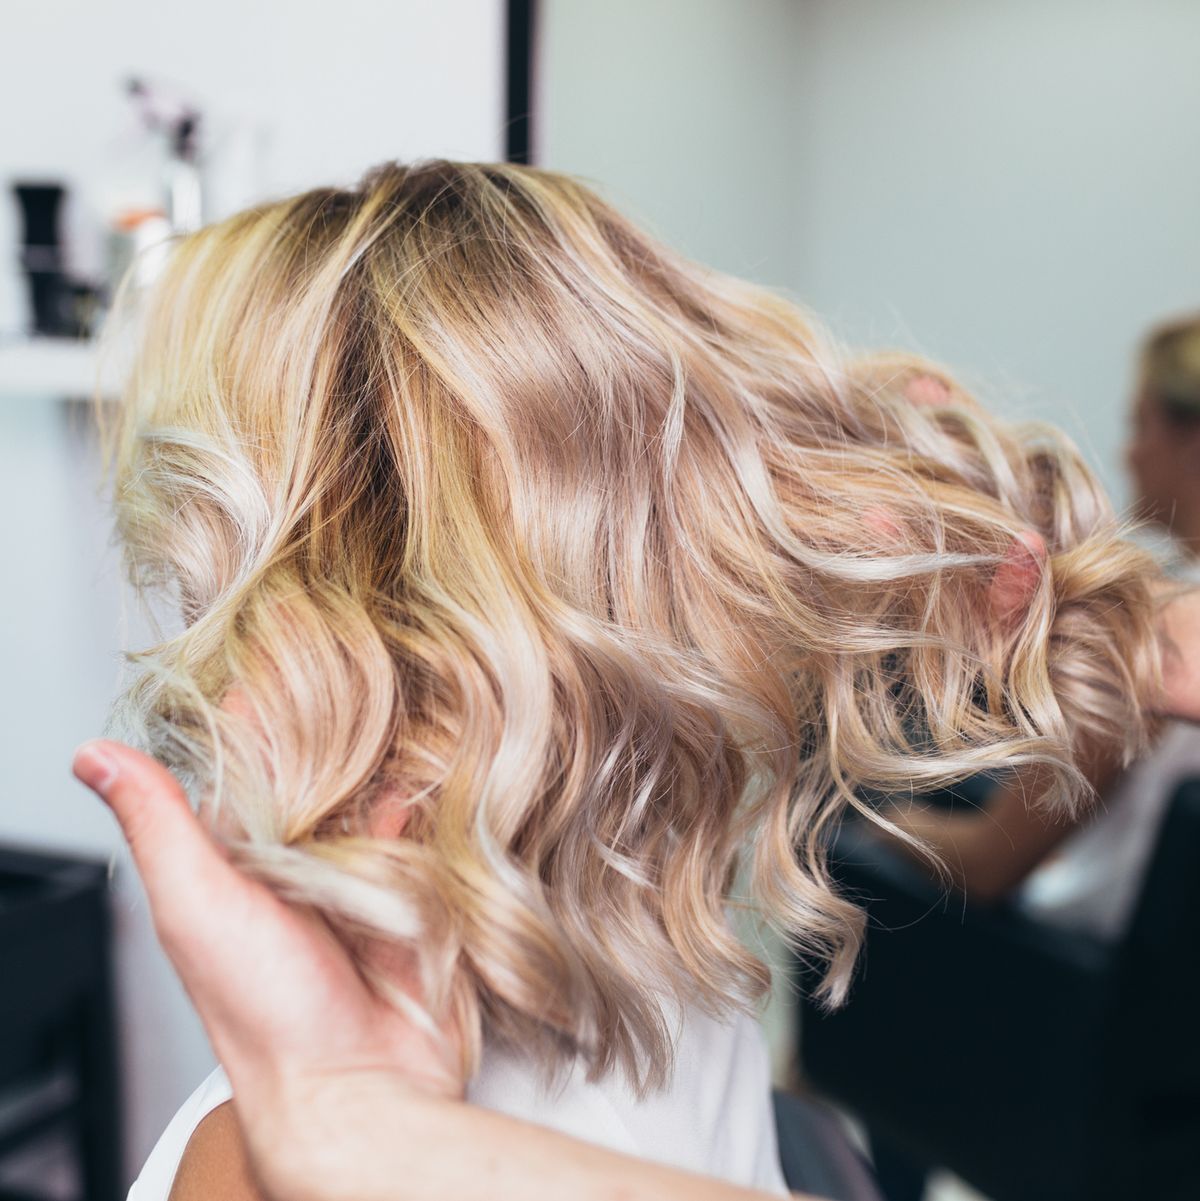 From blonde to brassy: how you can avoid turning your locks copper